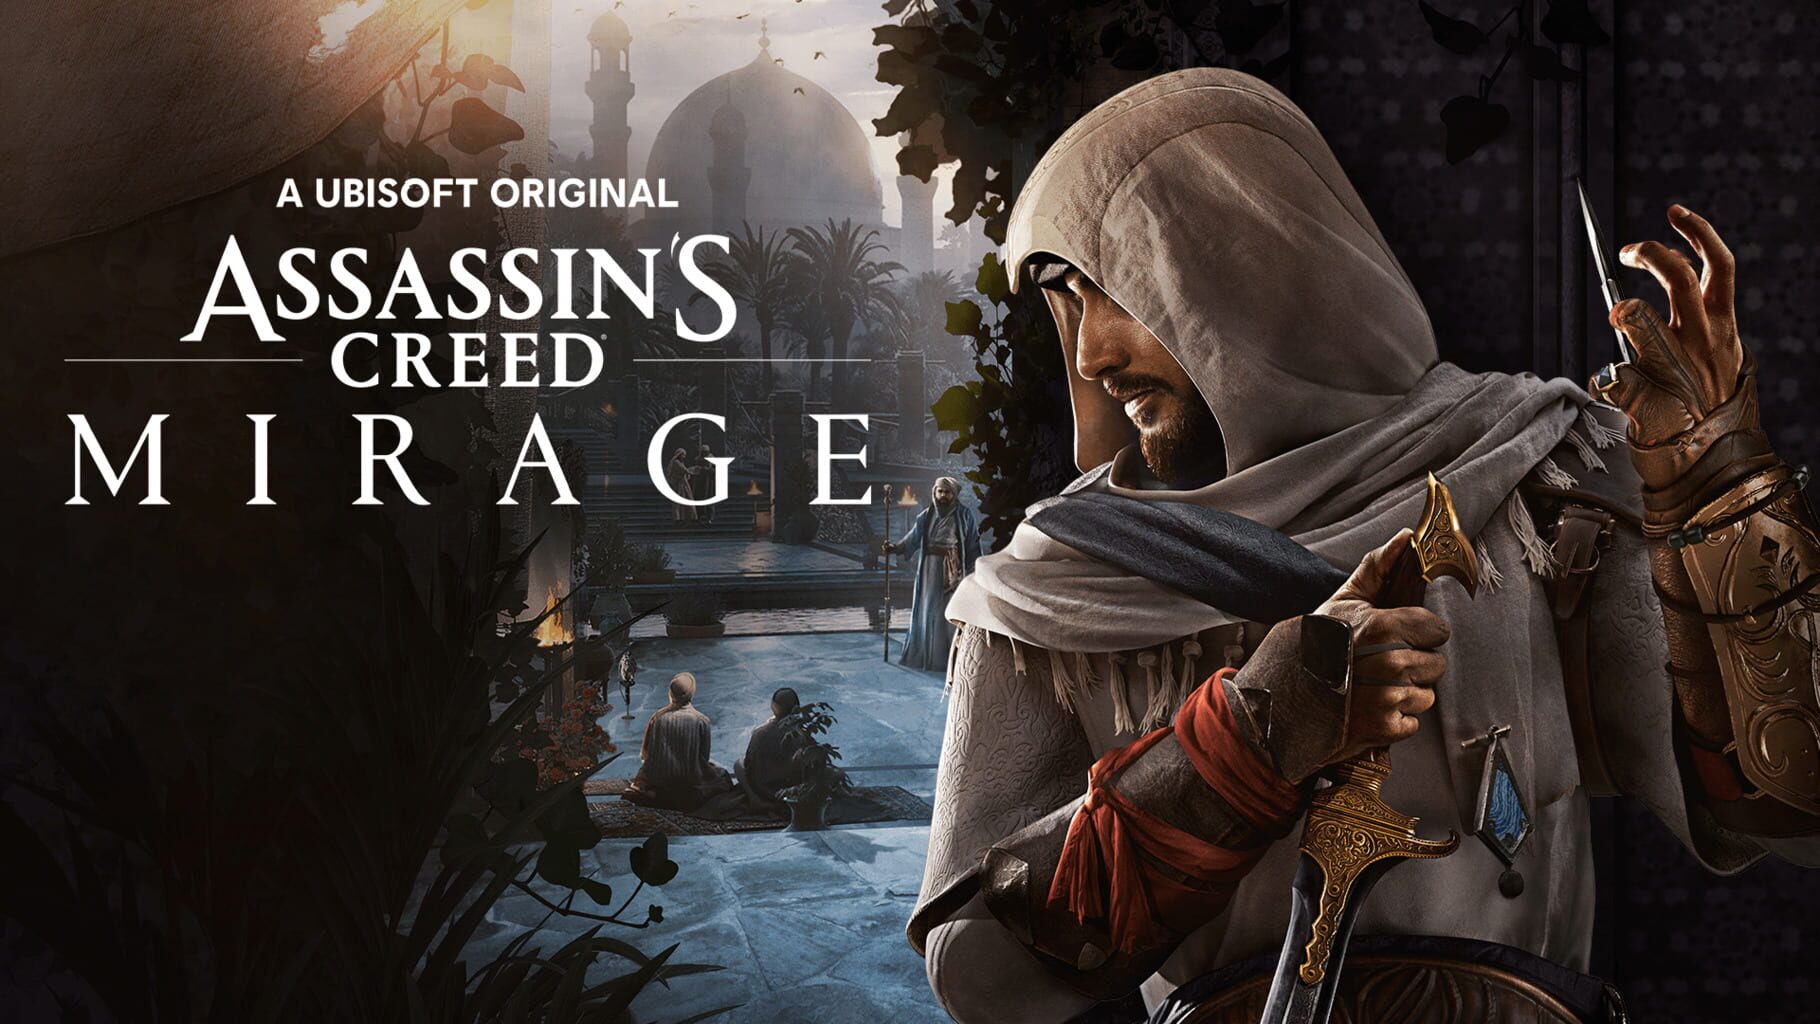 Artwork for Assassin's Creed Mirage